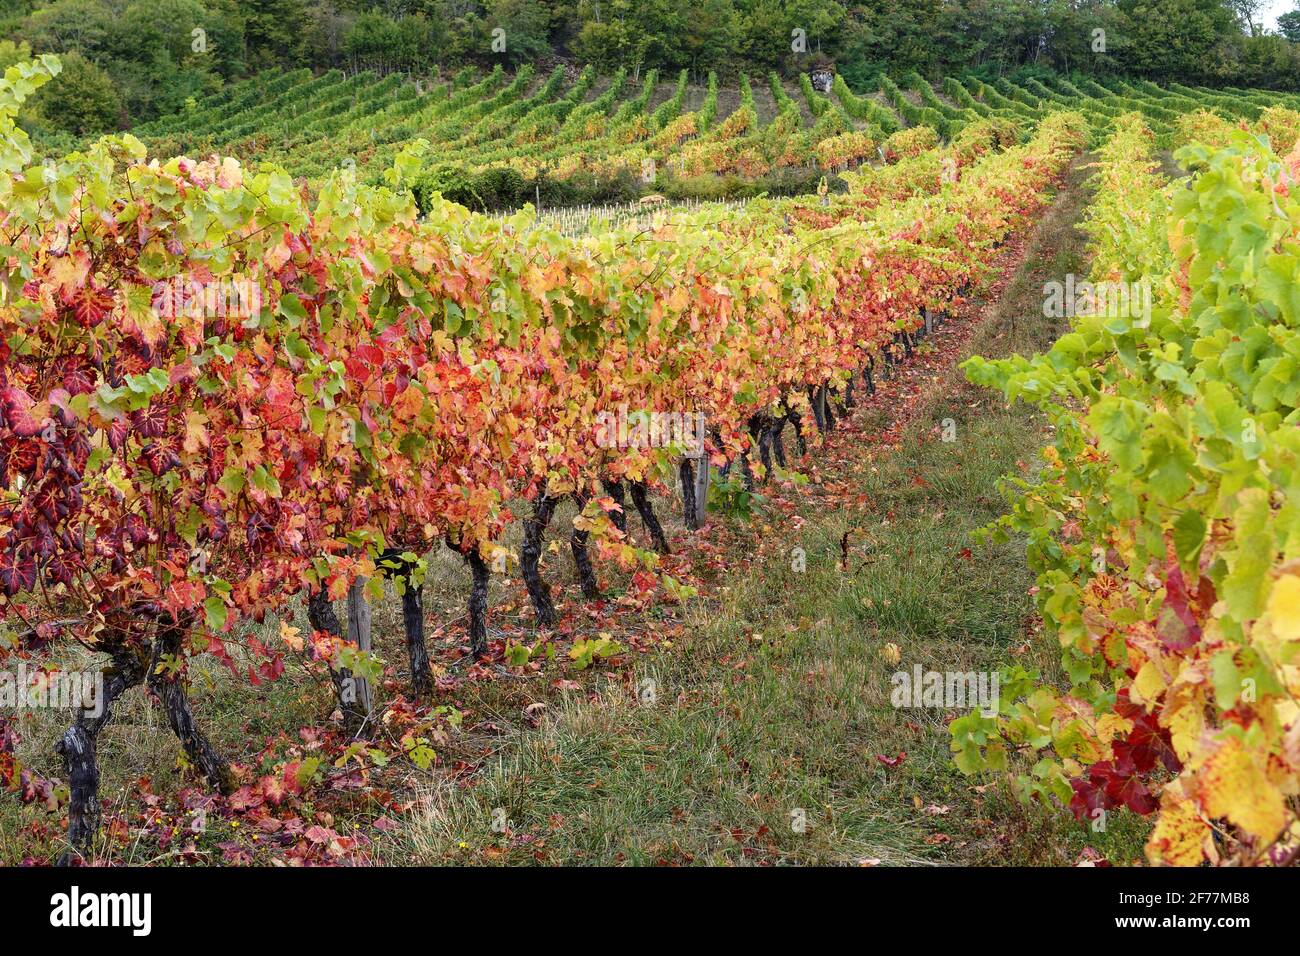 France, Cote d'Or, Monthelie, cultural Landscape of the climates of Burgundy listed as World Heritage by UNESCO, the vineyard of Burgundy, AOC vineyard of the coast of Beaune Stock Photo